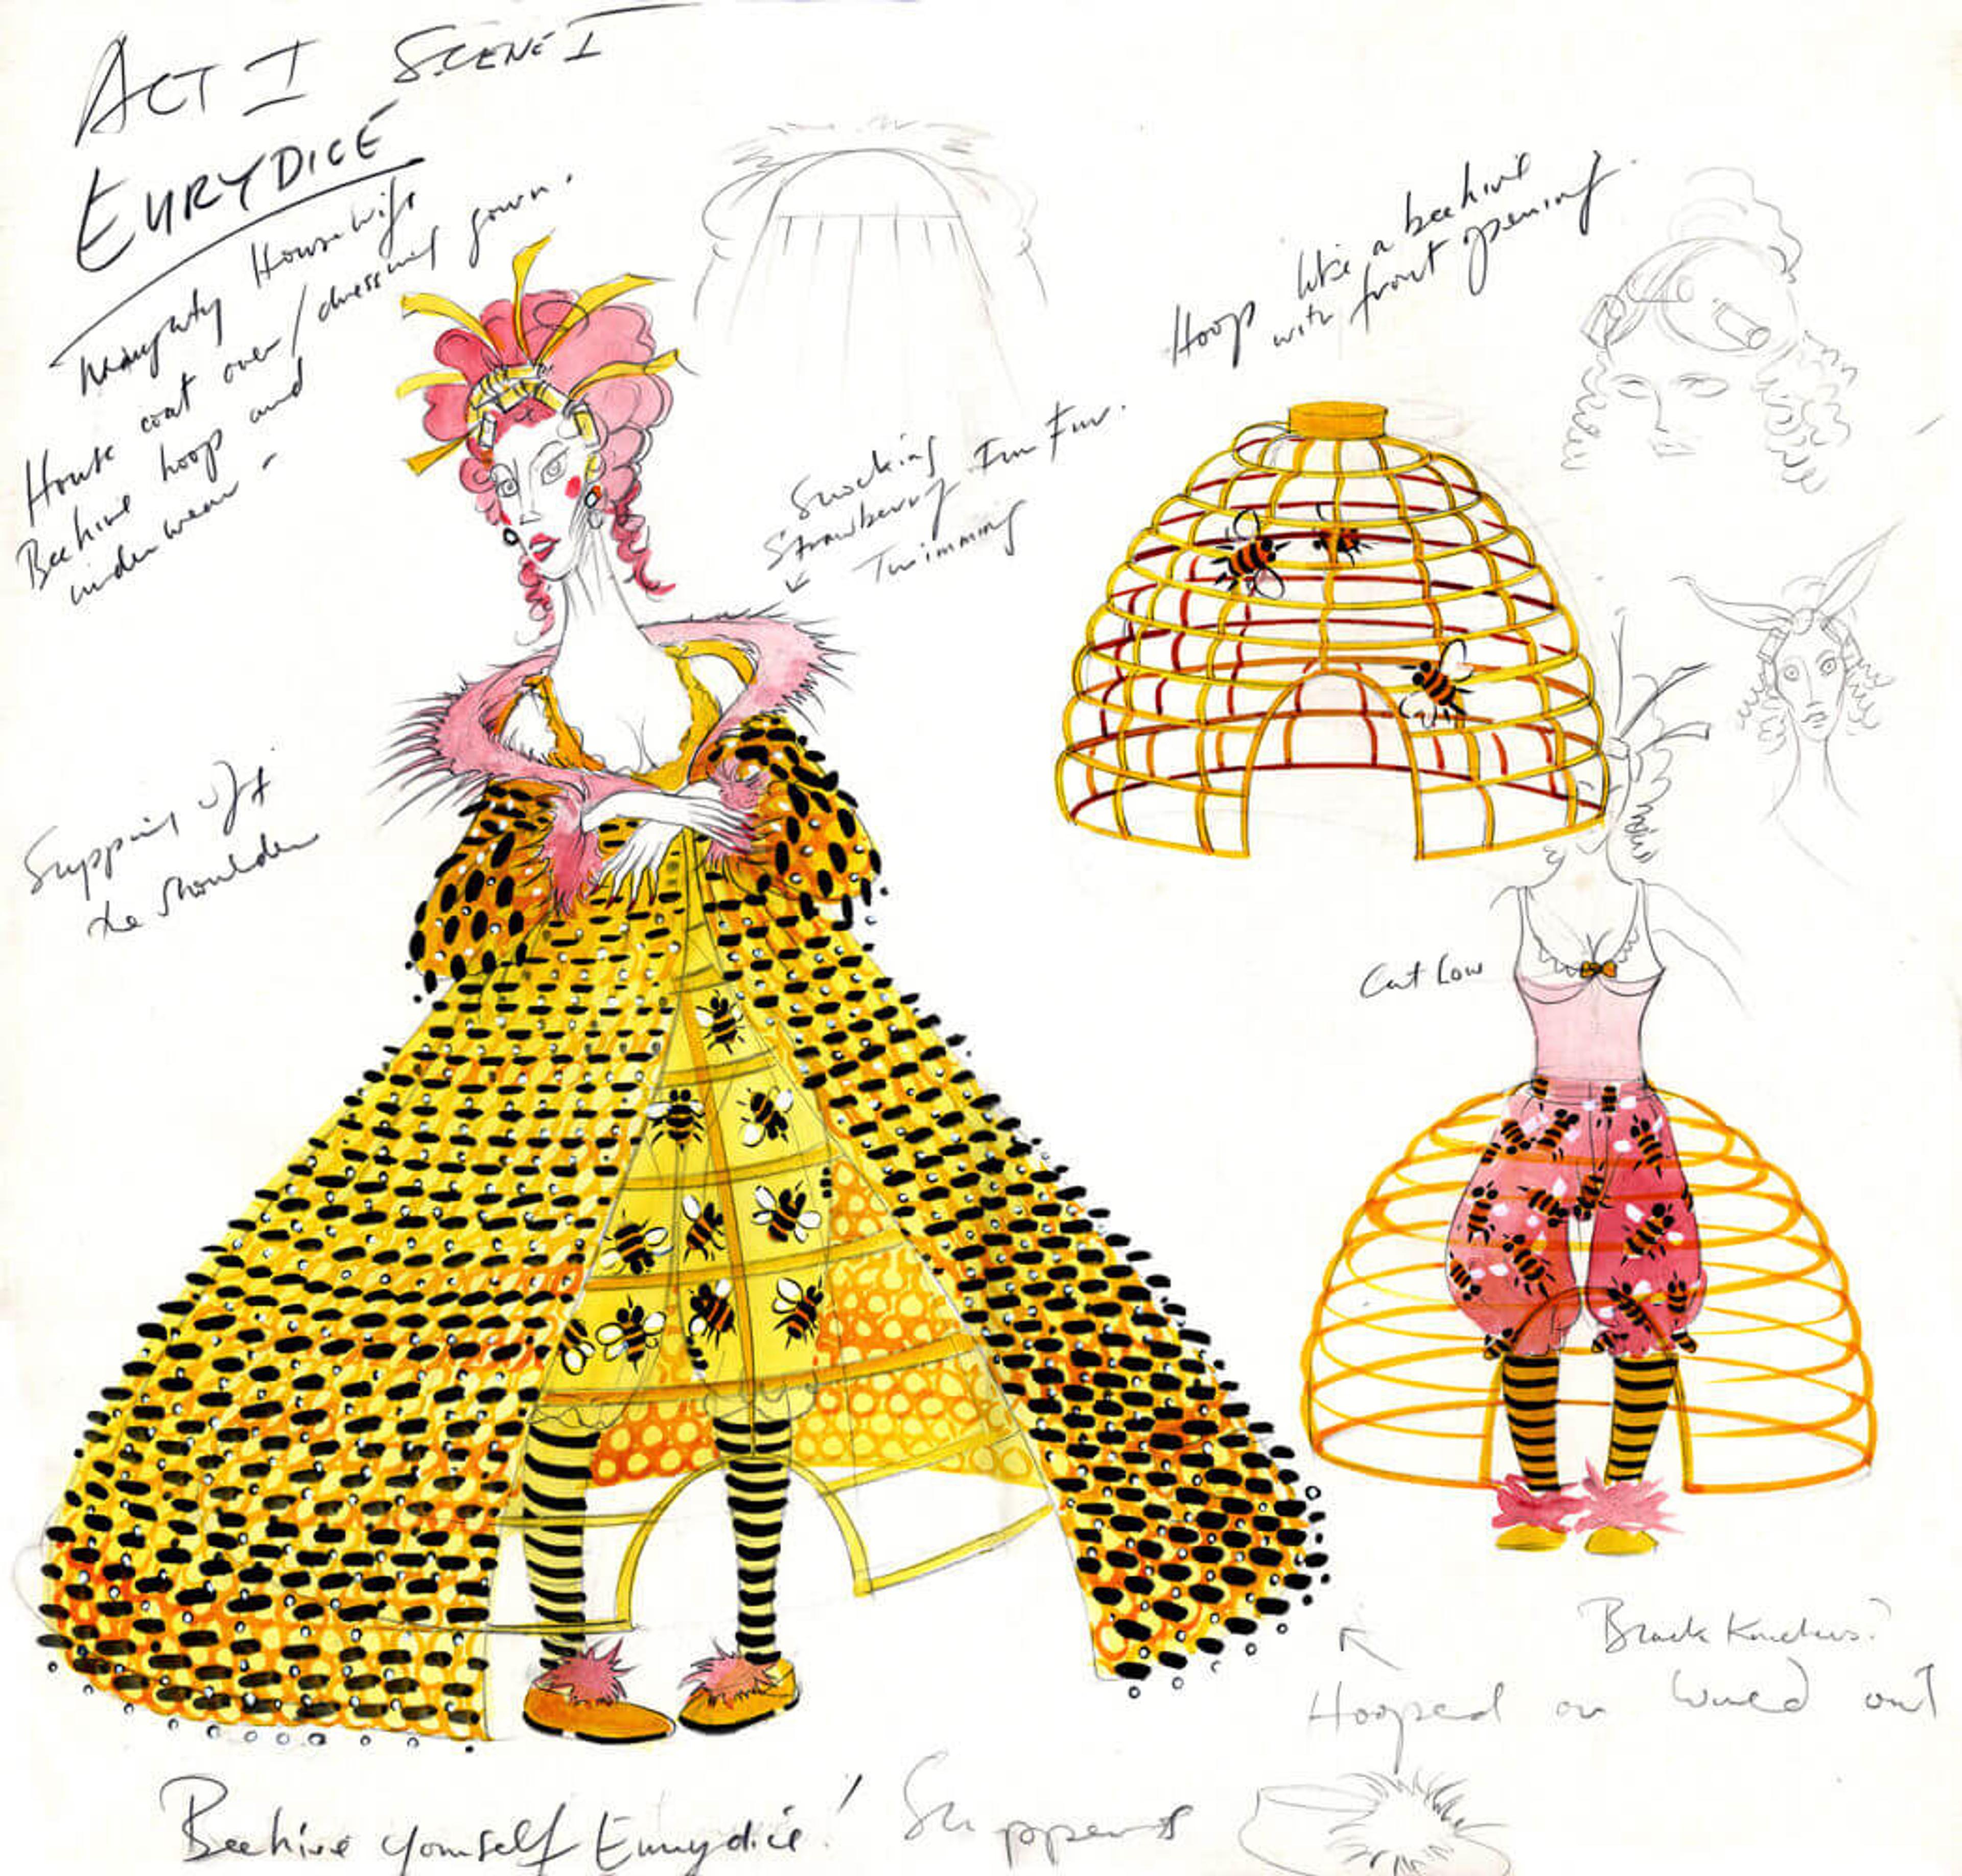 Annotated sketch of a costume with an elaborate hoop skirt